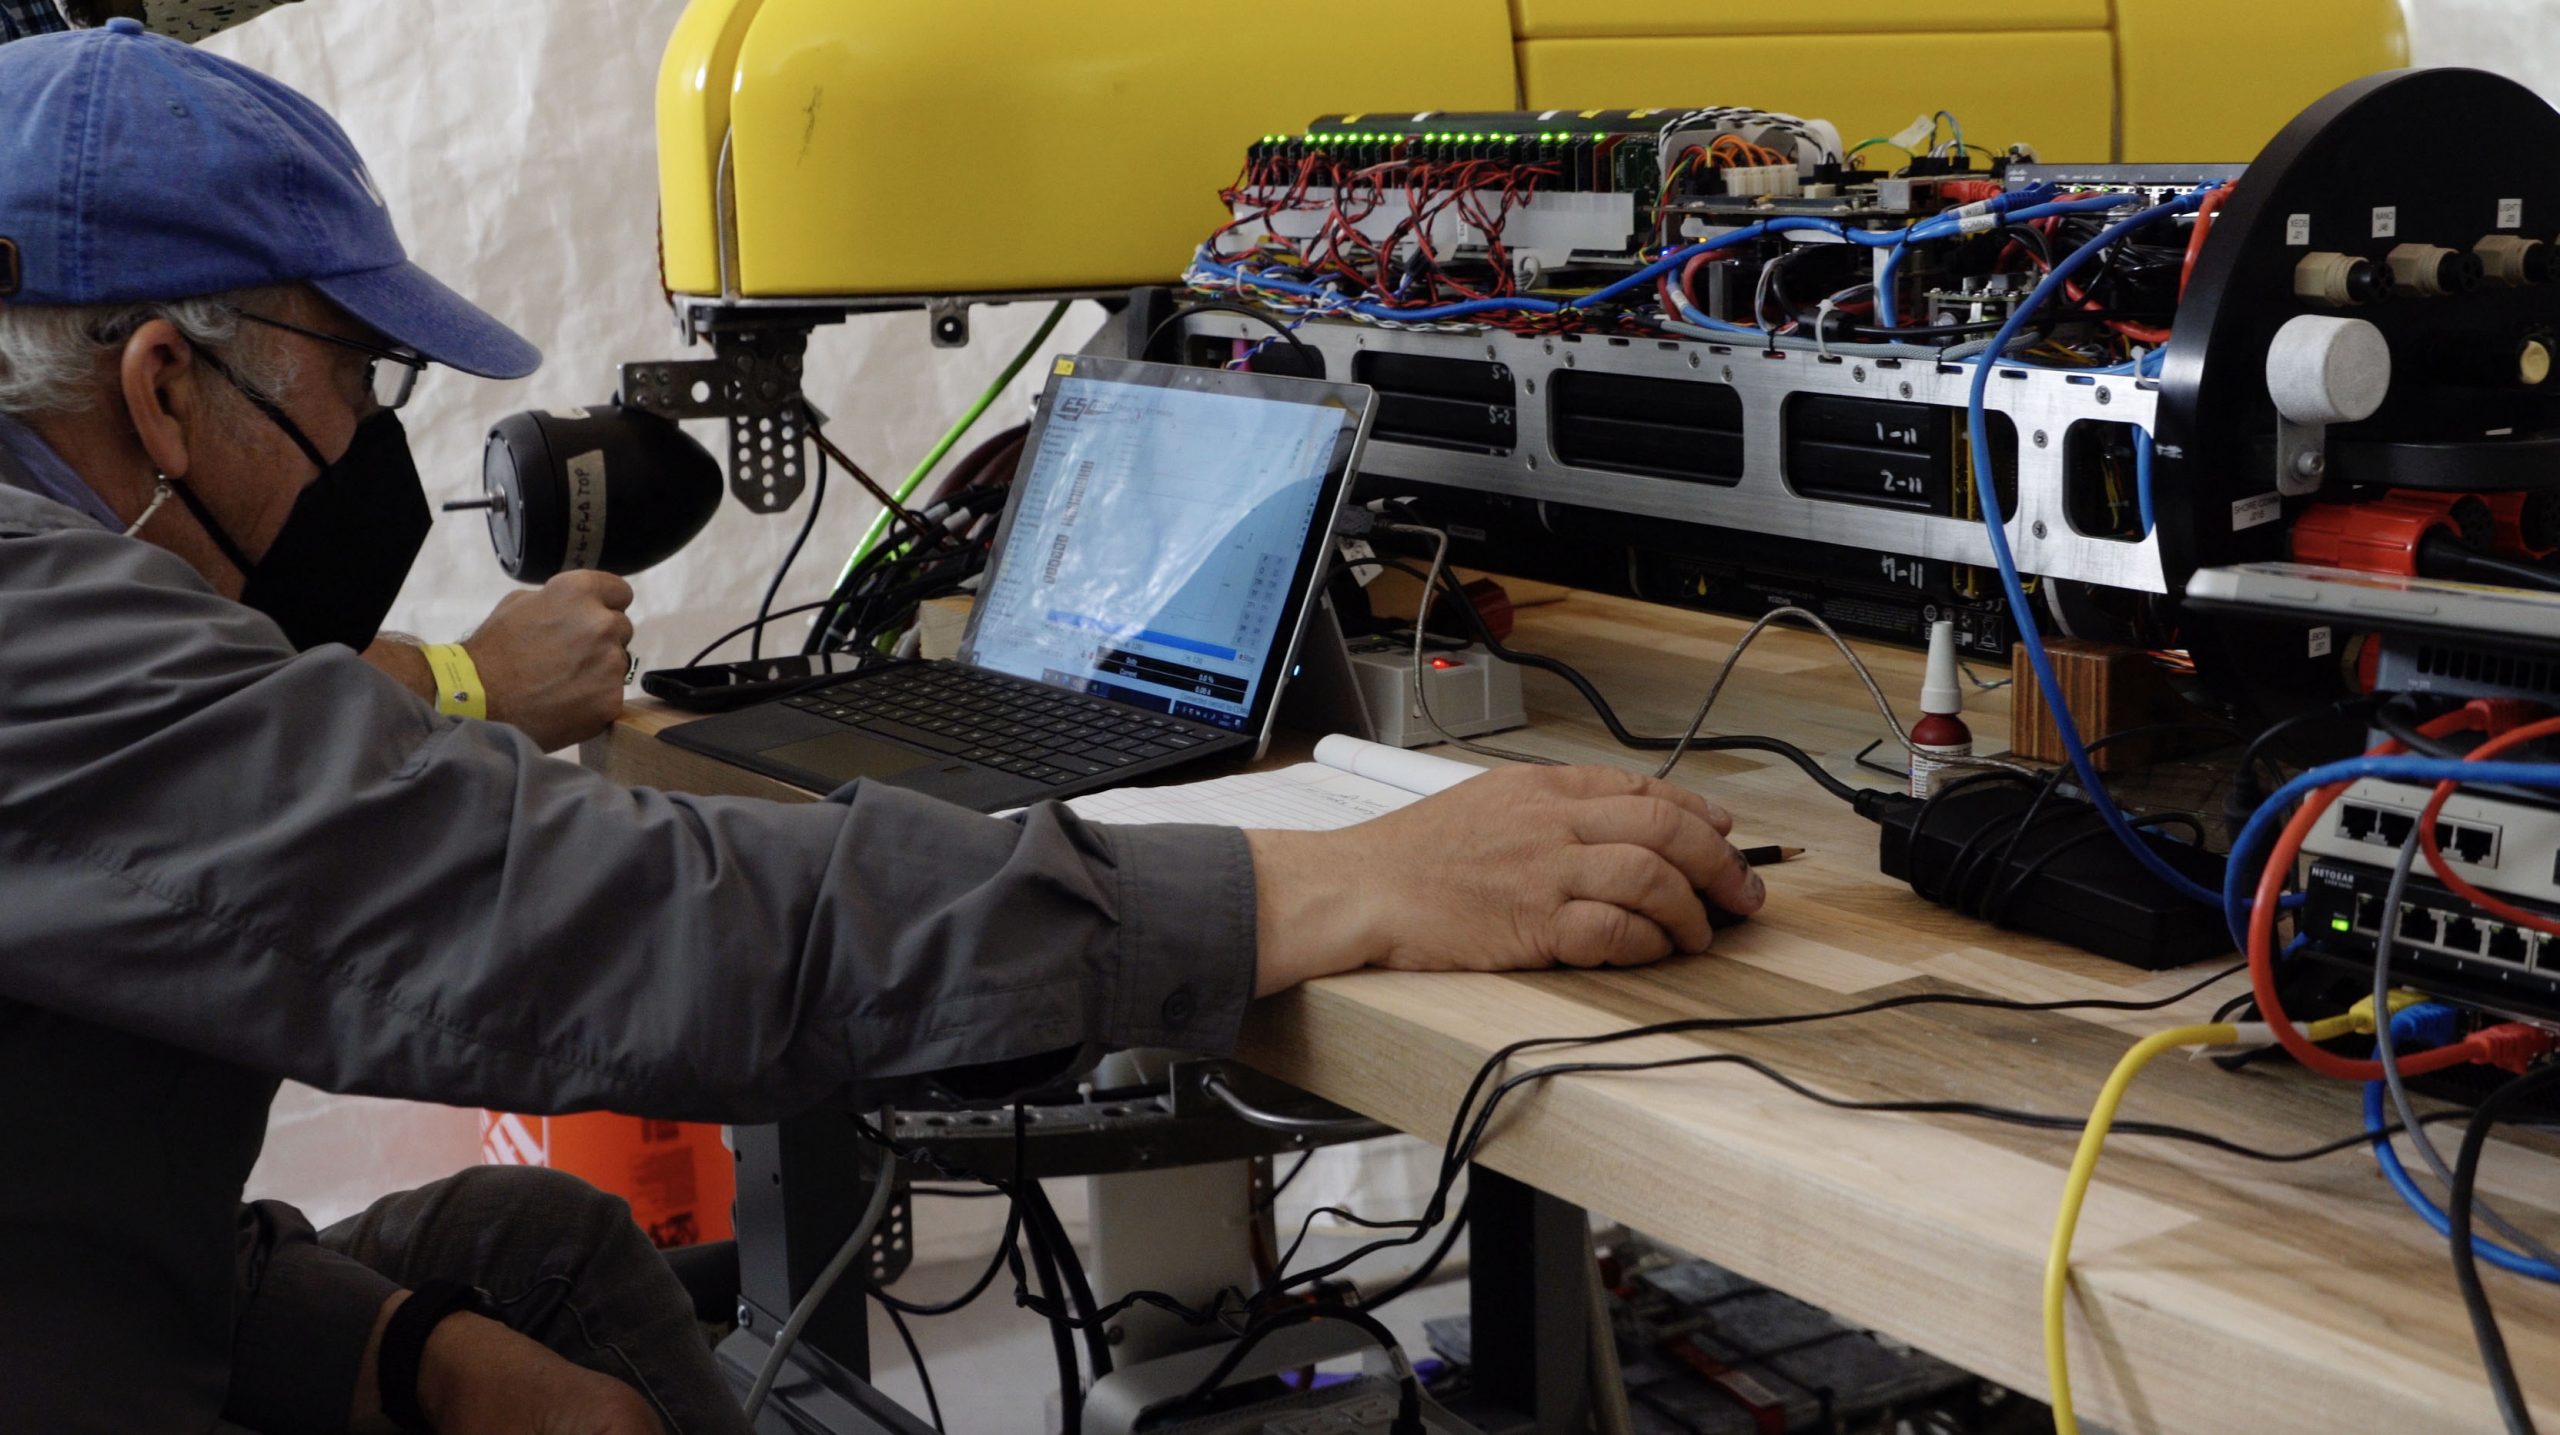 WHOI Senior Scientist Dana Yoerger uses an open-source software, VESC (Vedder Electronic Speed Controller), to calibrate Mesobot's motors.